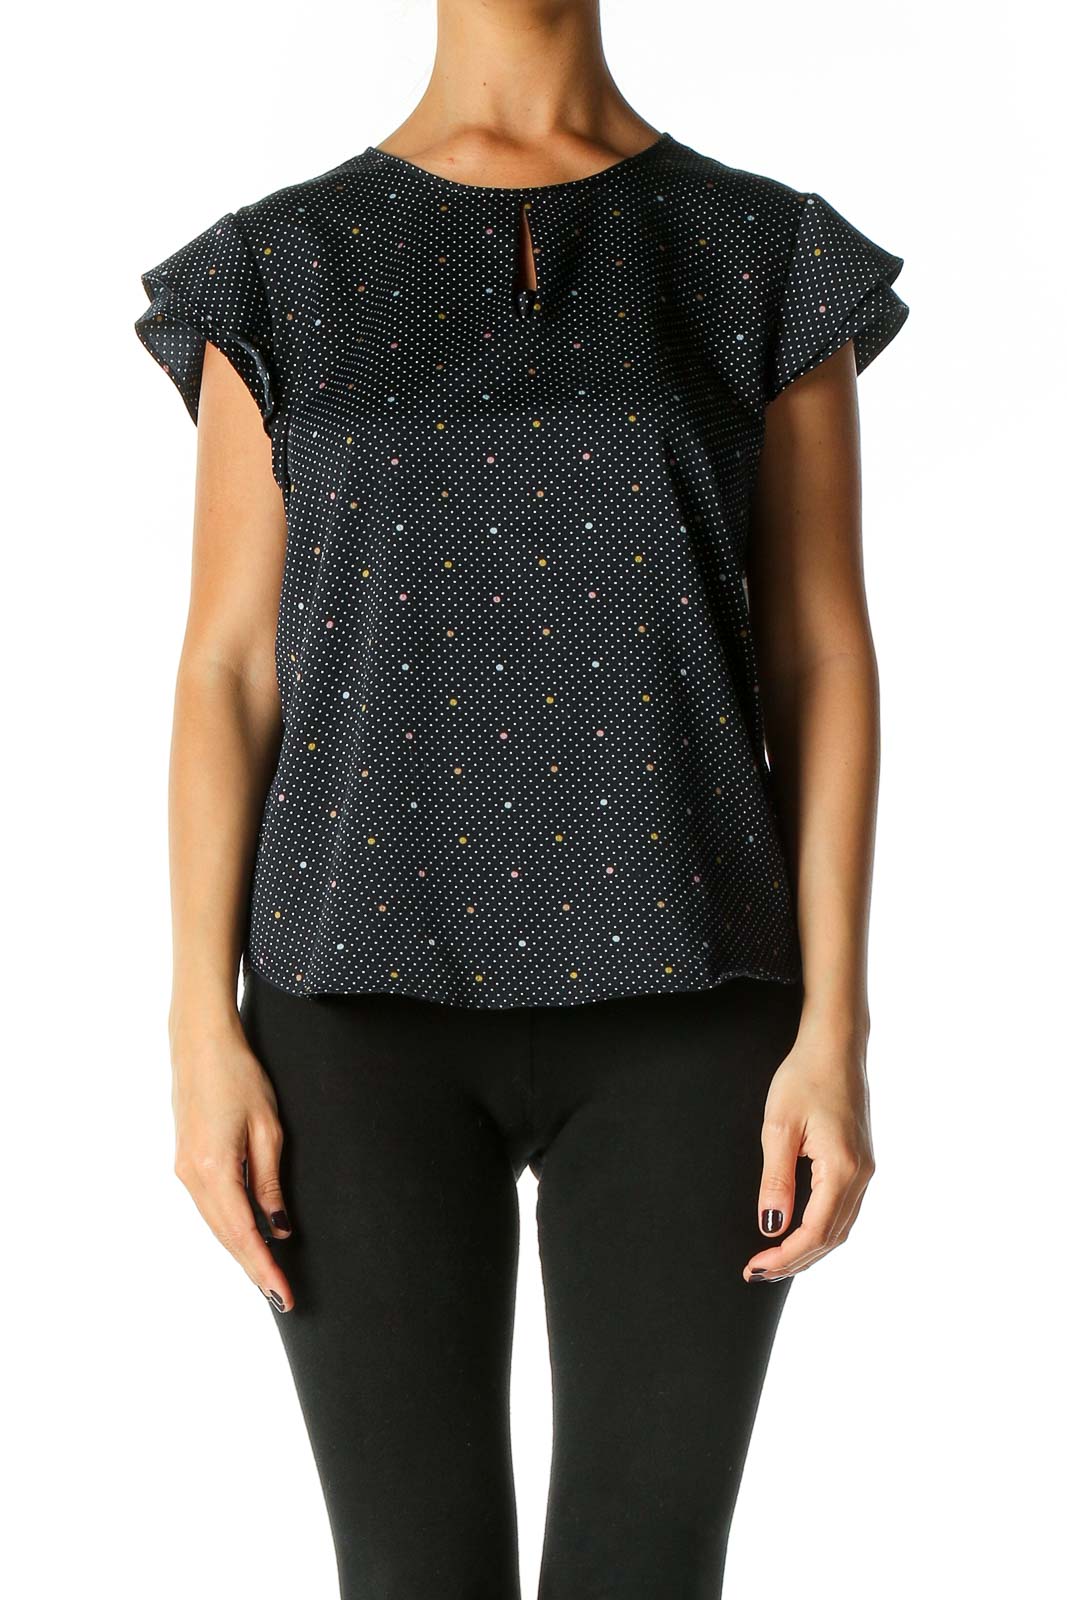 Blue Polka Dot All Day Wear Blouse Front